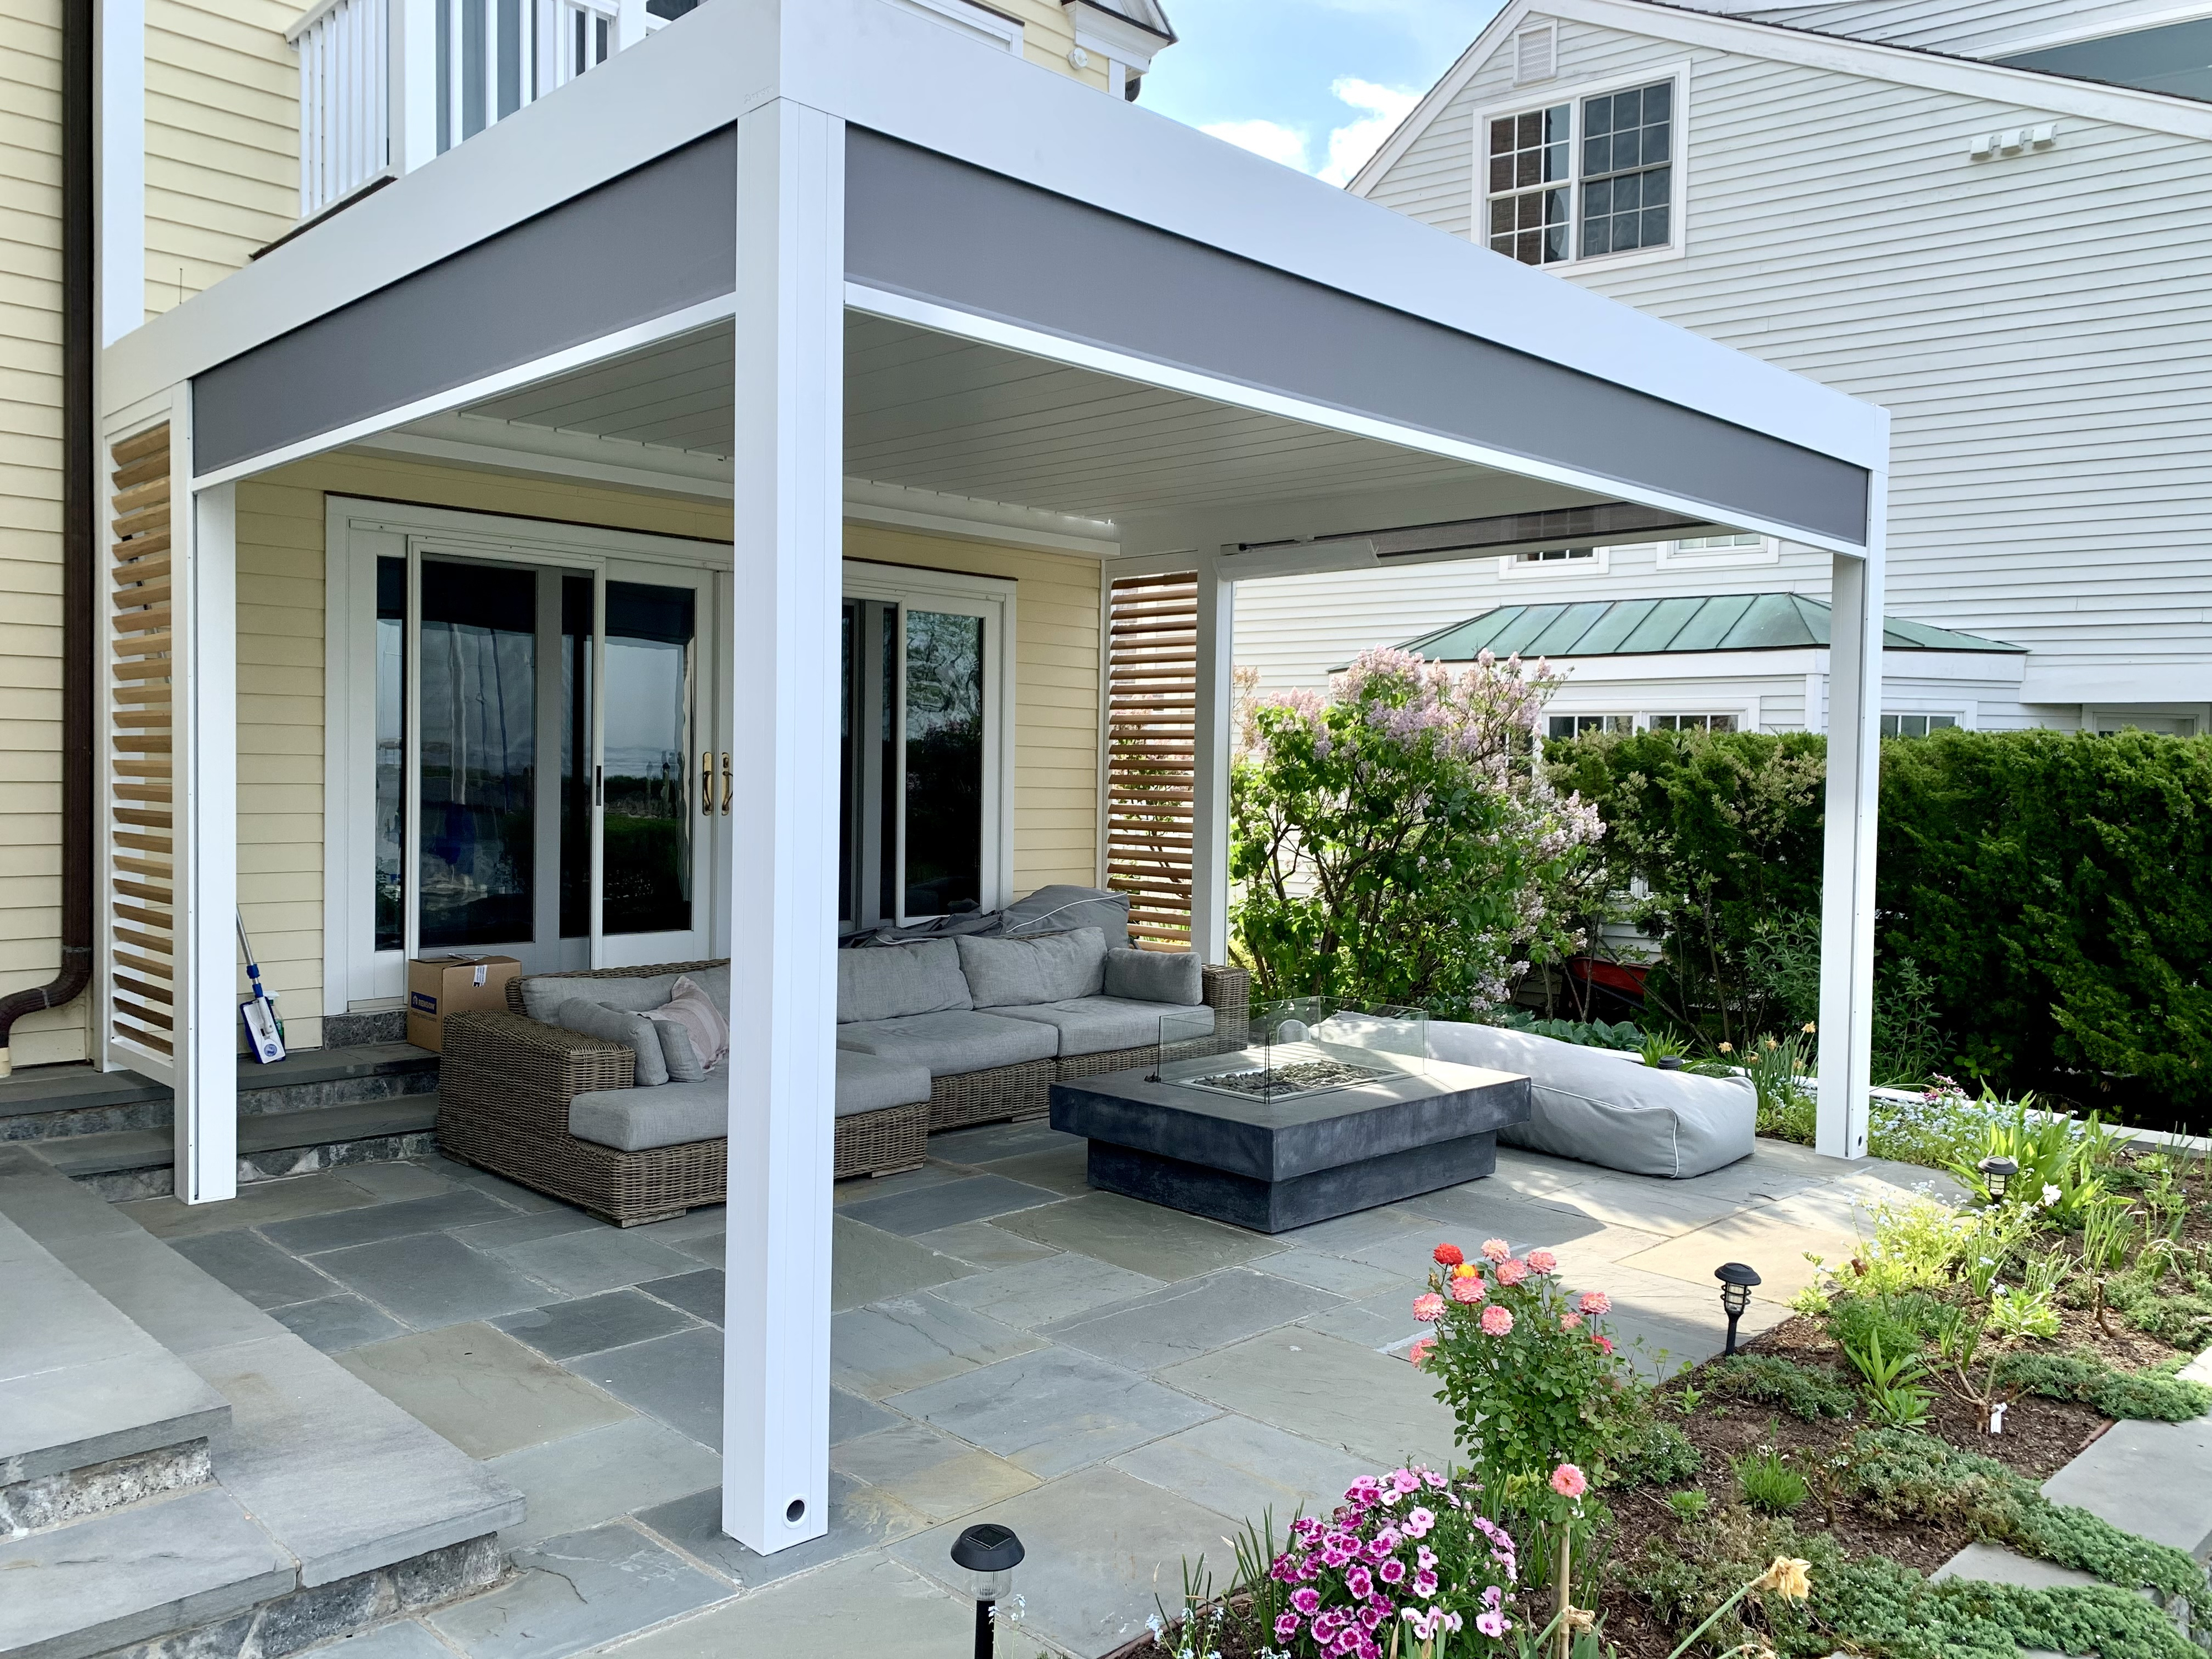 Home exterior with patio seating under a pergola, adjacent to a garden